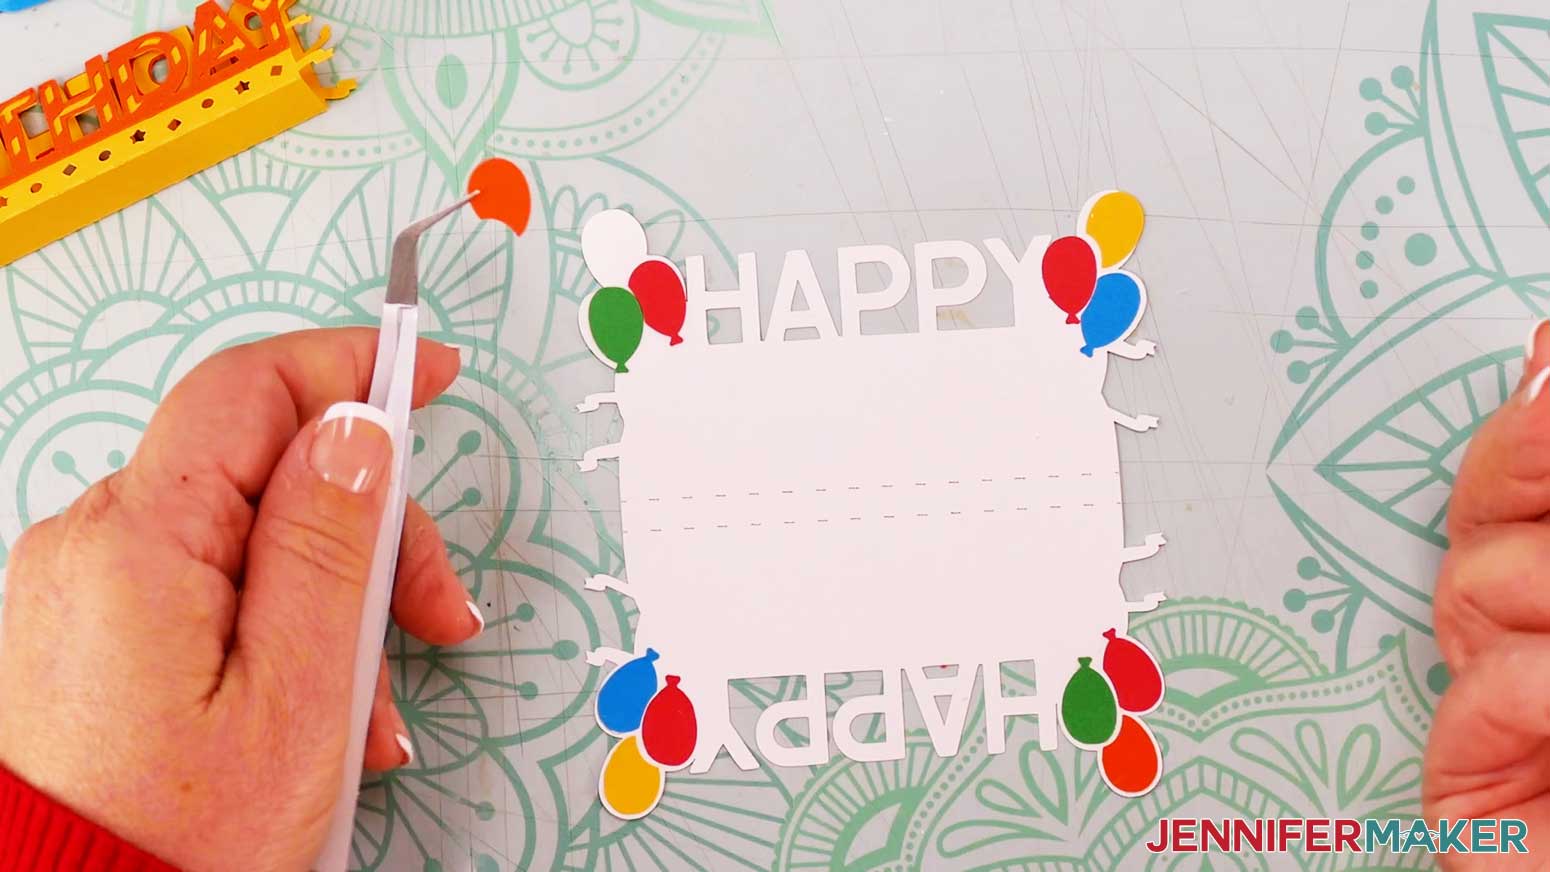 Place the twelve balloon pieces in their correct positions for the birthday themed cardboard jumping box and use tweezers to help glue them in place one by one